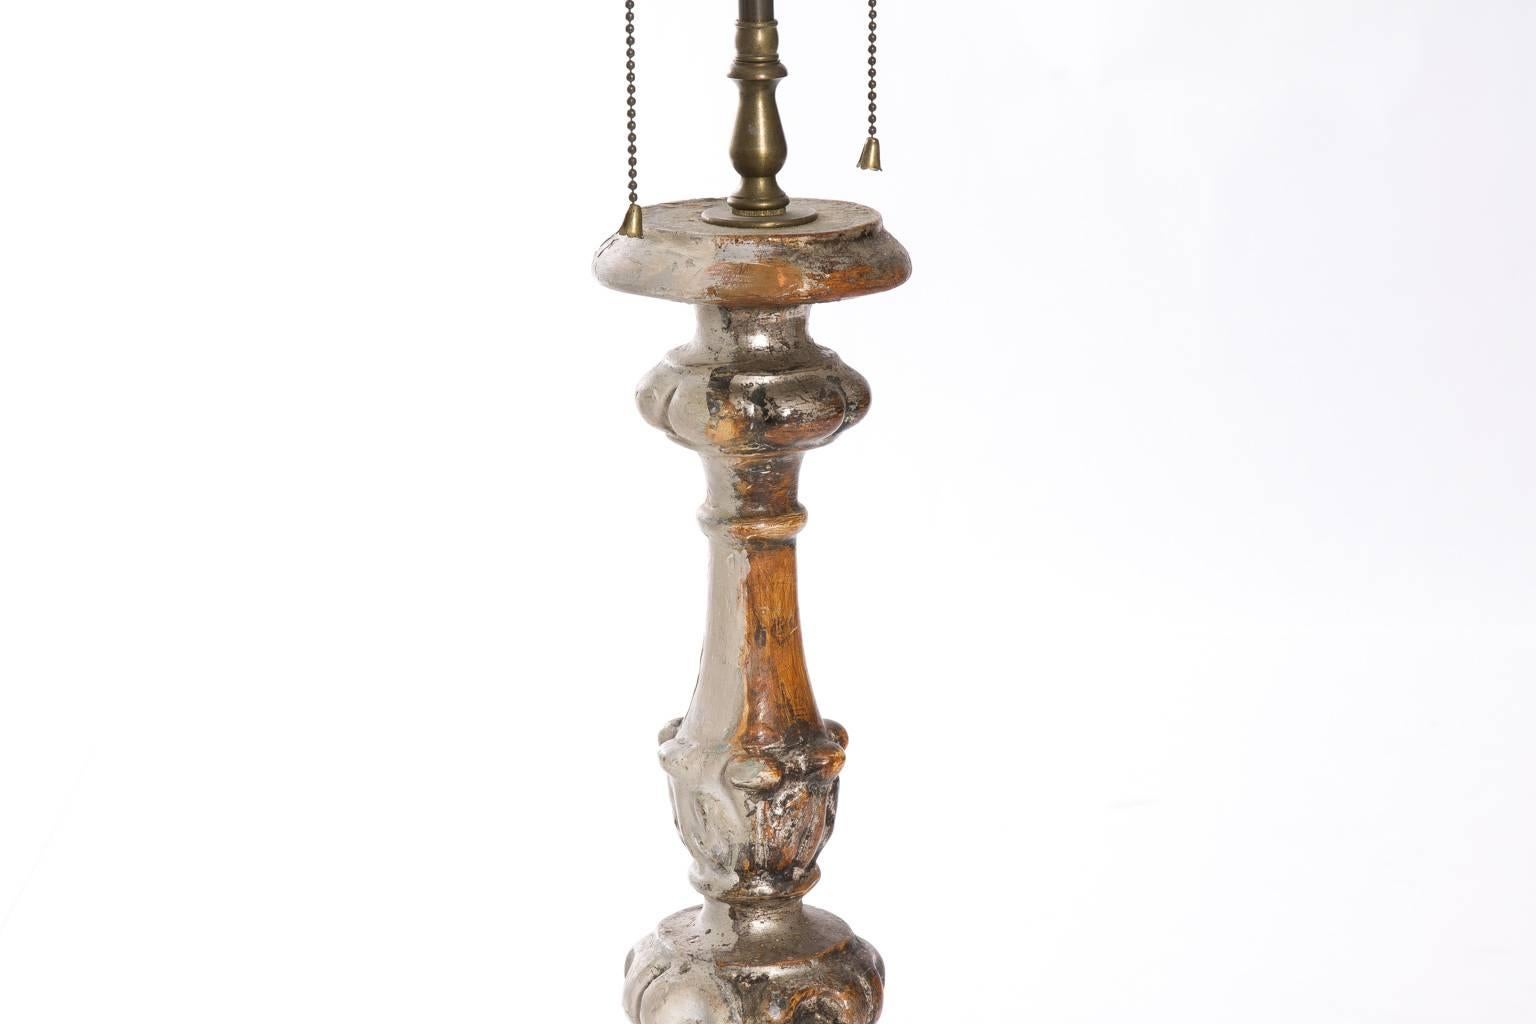 Pair of 18th century Italian candlesticks which have been mounted as lamps. The candlesticks are Baroque in style and silver gilt.